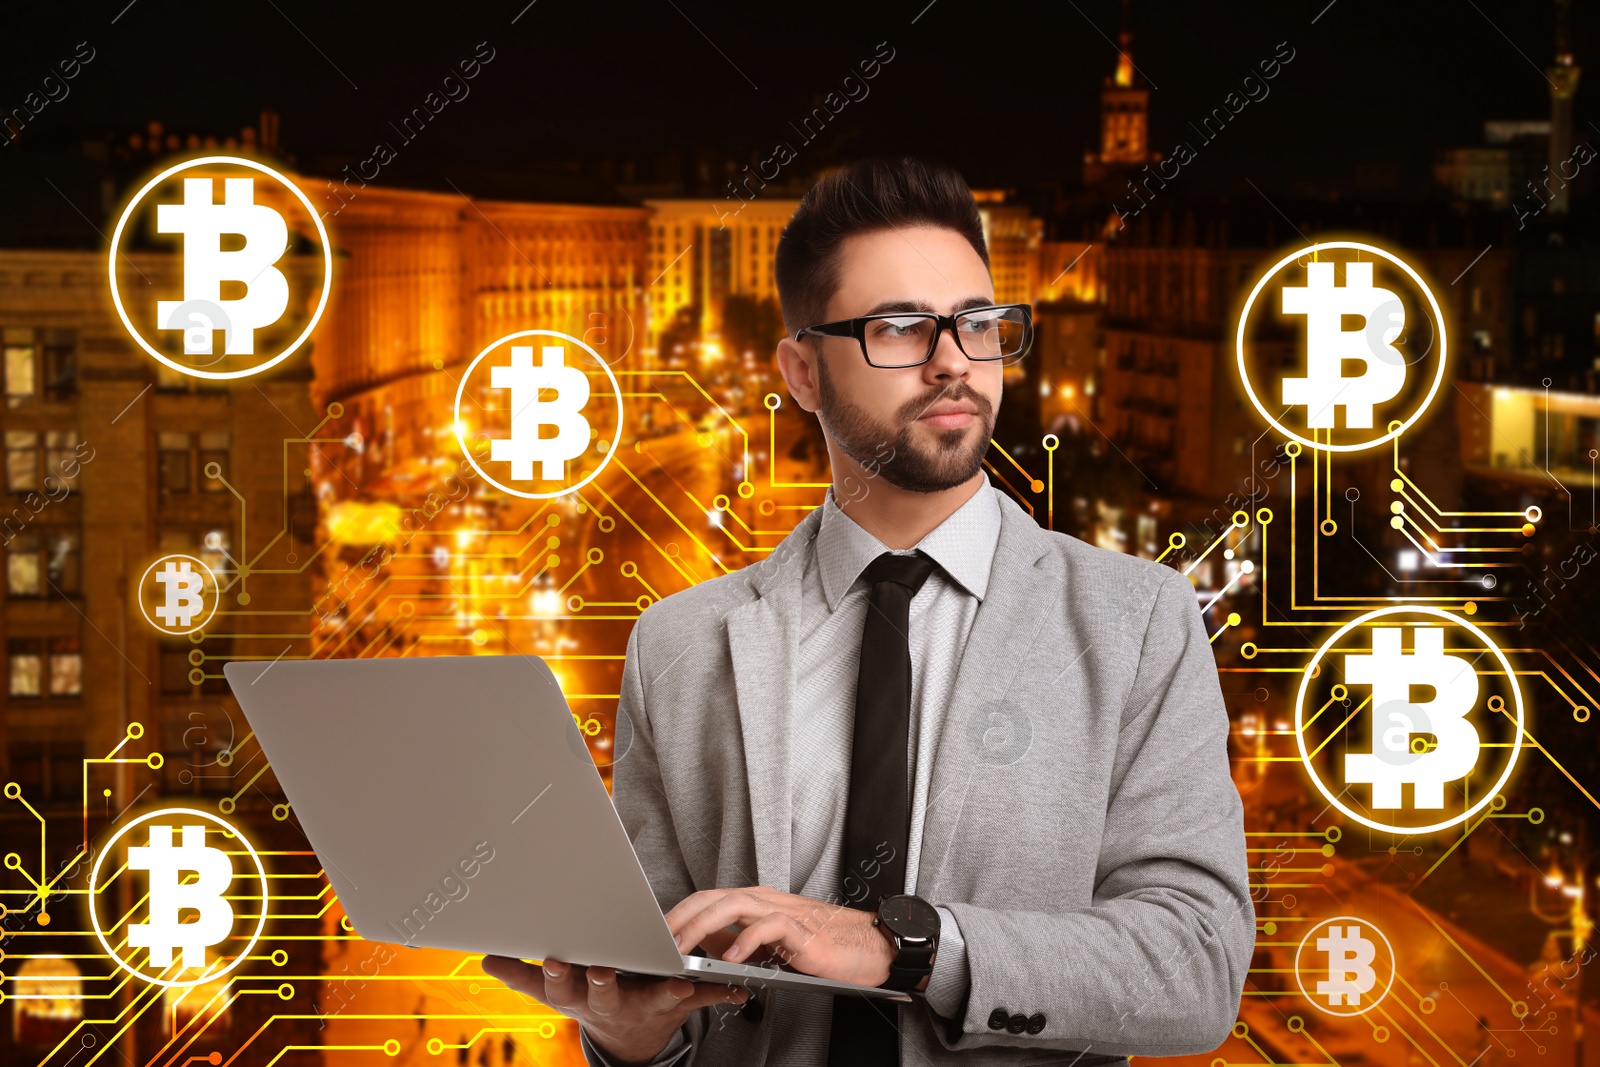 Image of Fintech concept. Scheme with bitcoin symbols and businessman using laptop on cityscape background